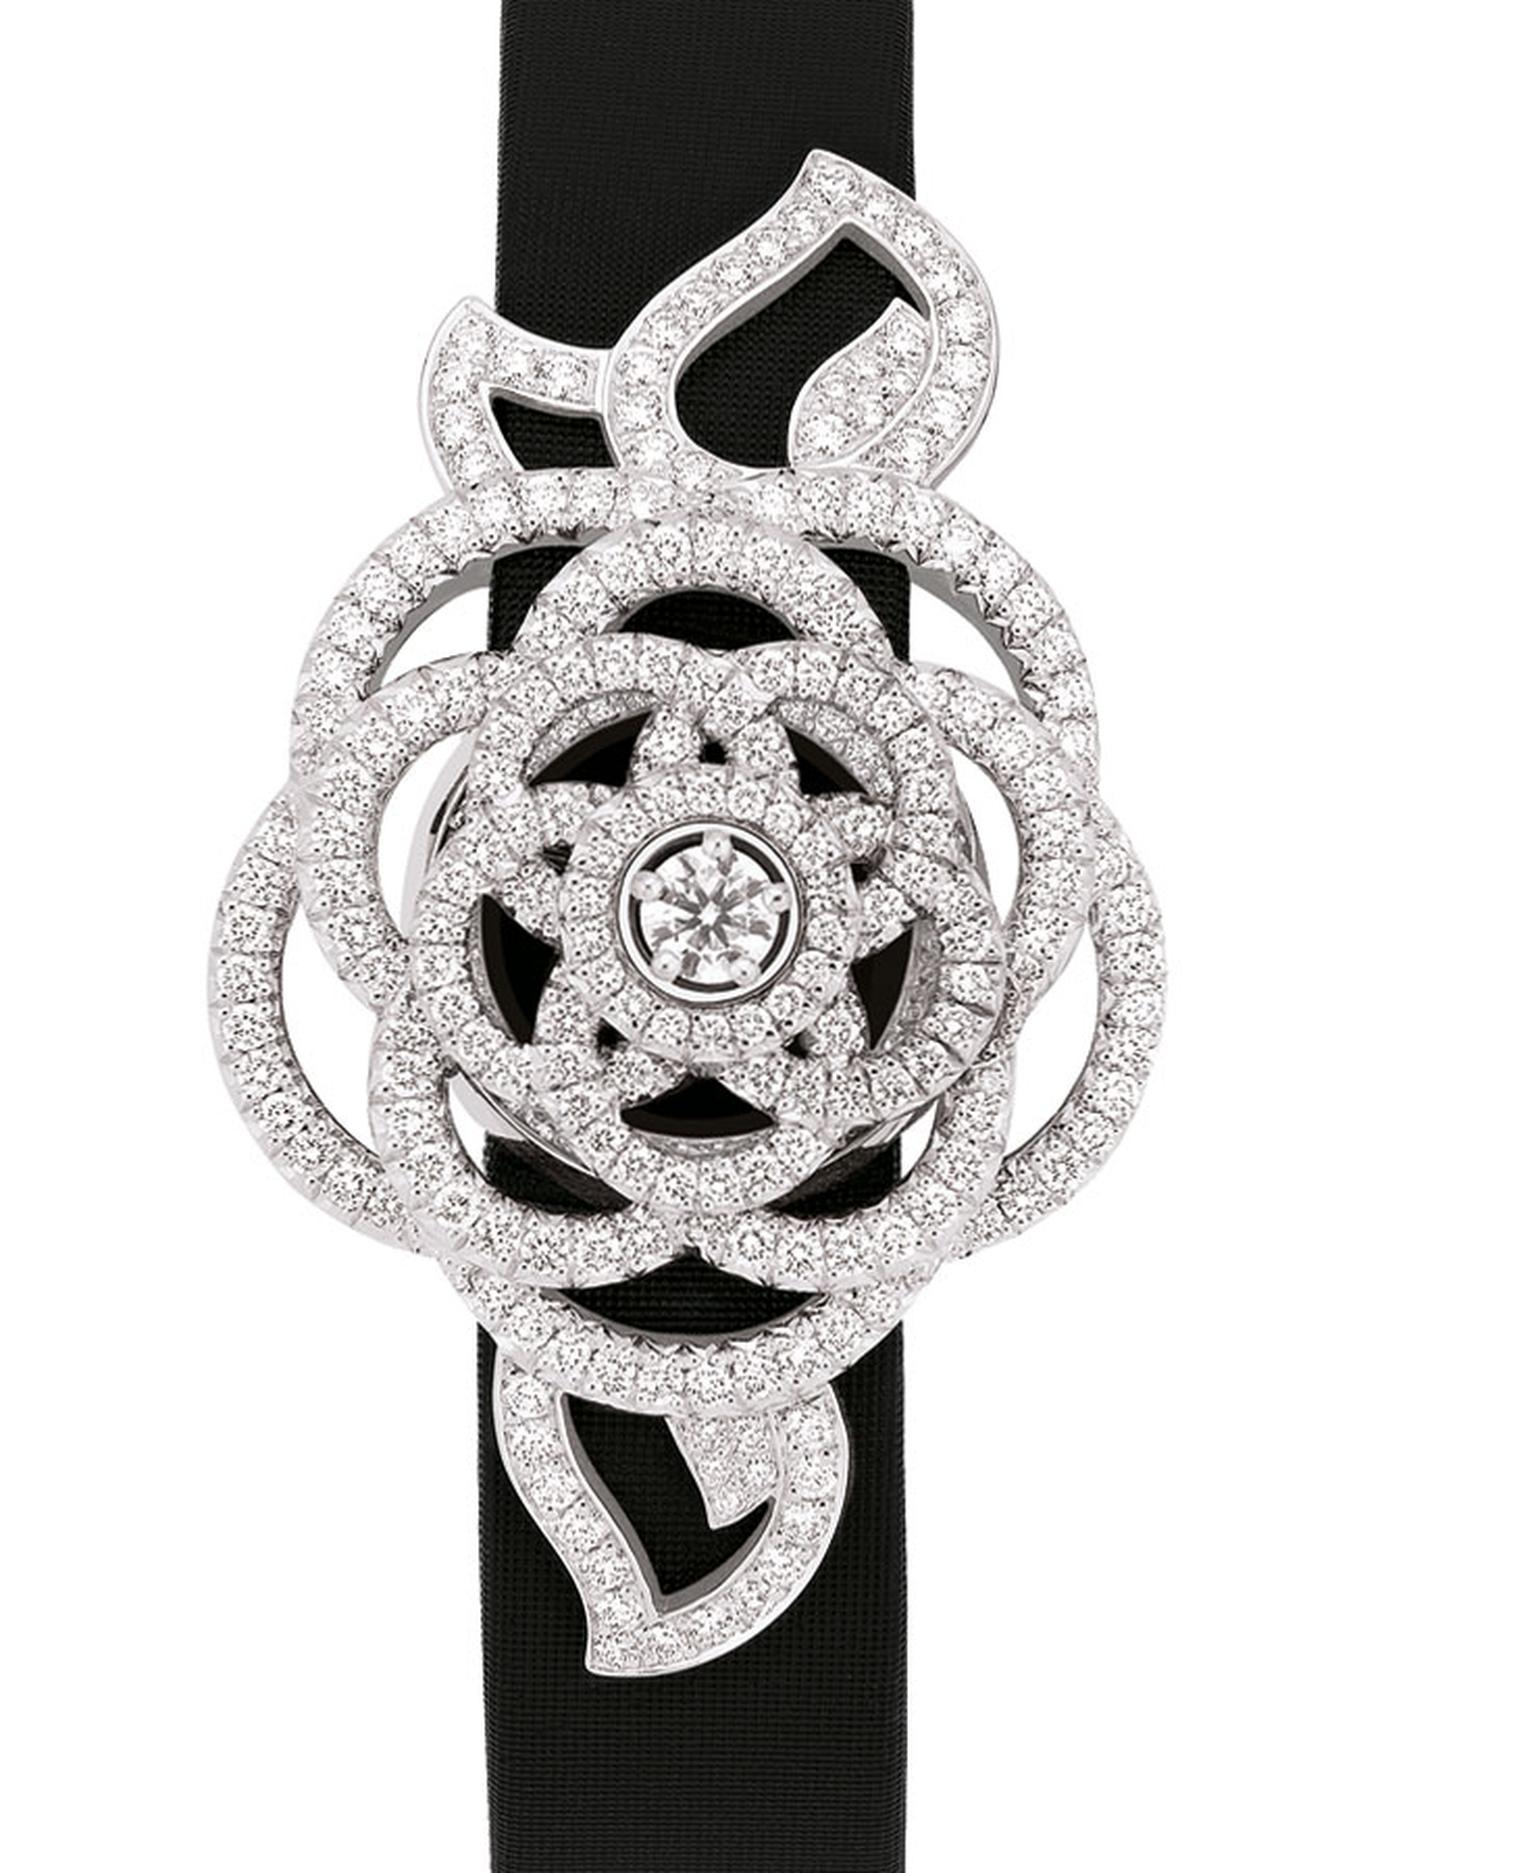 Chanel Came´lia Brode´ secret wtch in white gold and diamonds with black satin strap. Closed